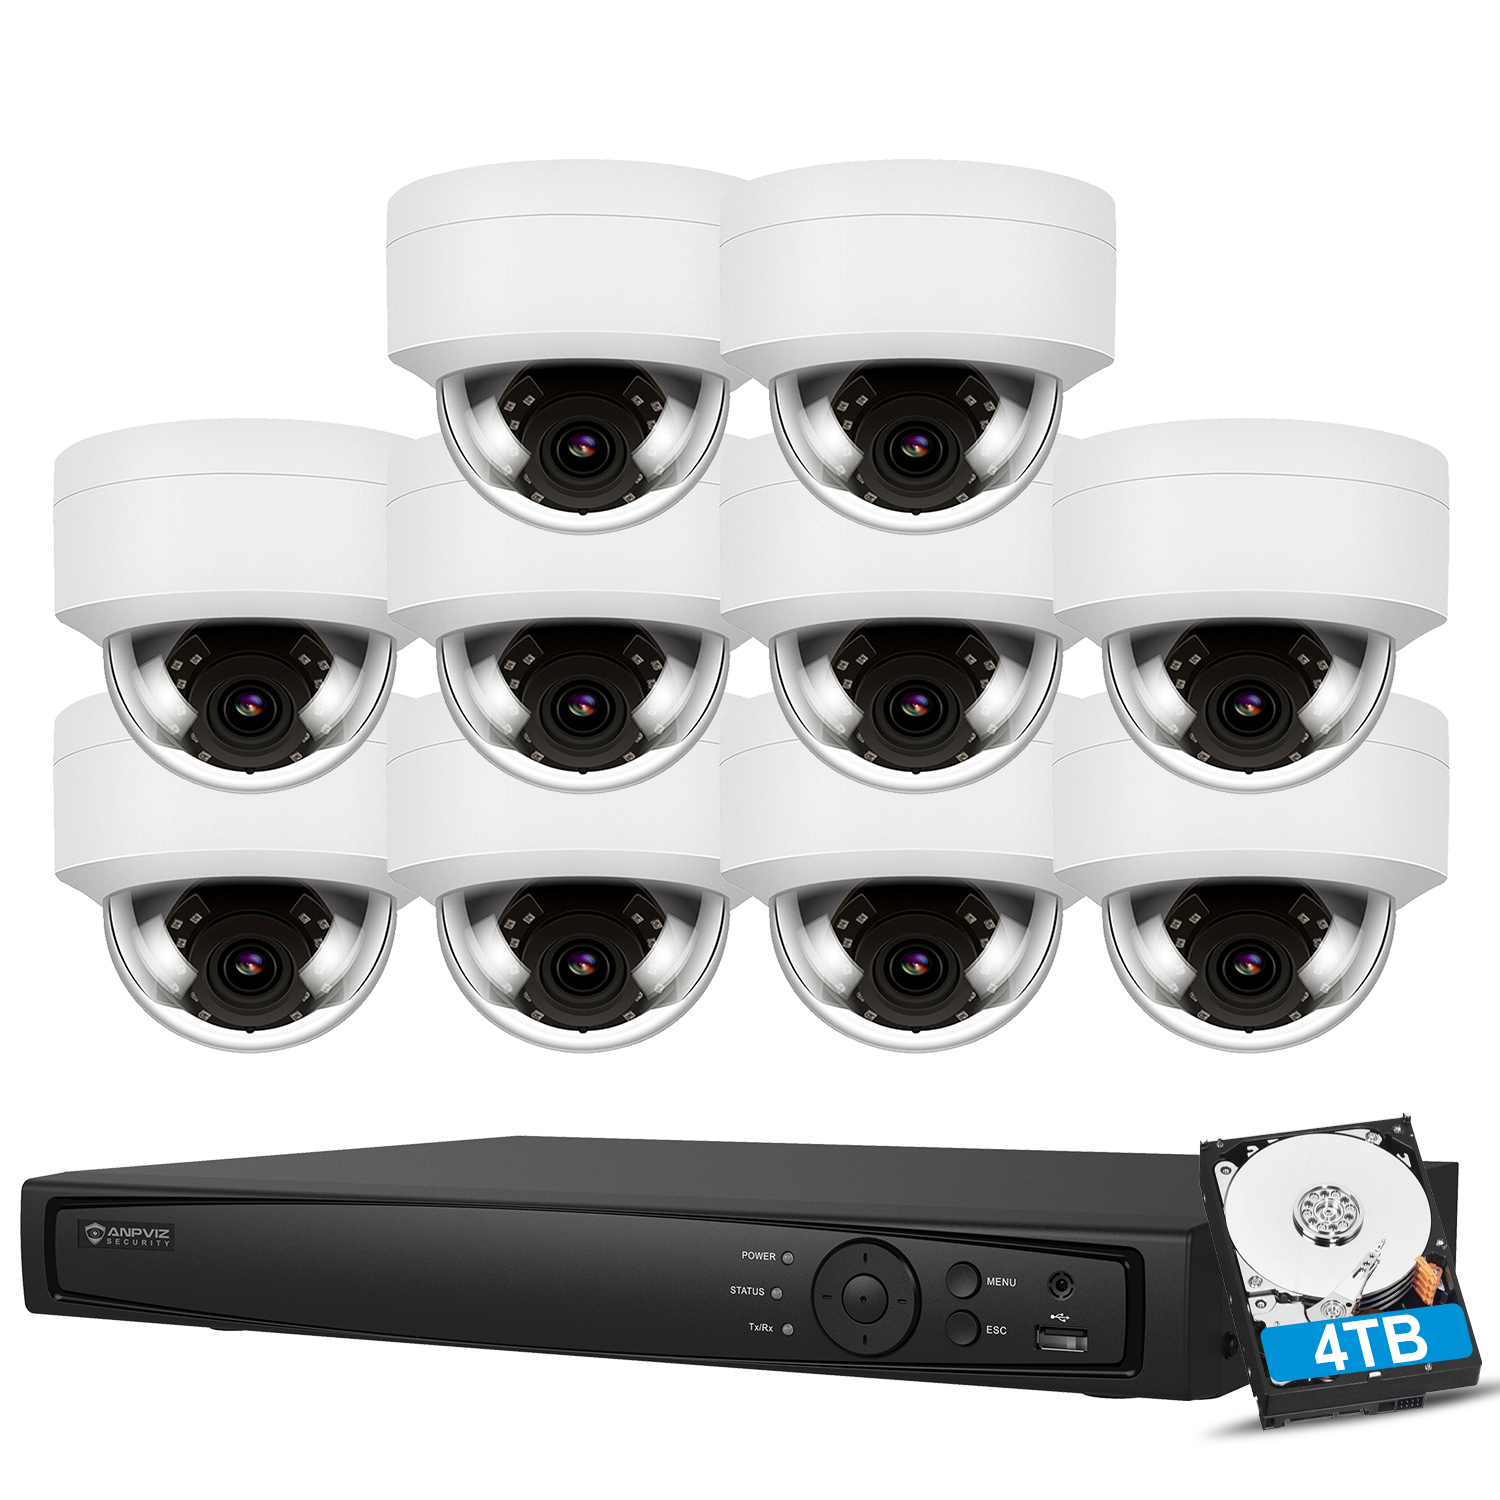 98ft Night Vision Hik-Connect Anpviz 5MP IP POE Security Camera System 8CH 4K H.265 NVR with 2TB HDD with Weatherproof 5MP Outdoor IP POE Dome Cameras Home Security System with Audio IVMS4200 6 